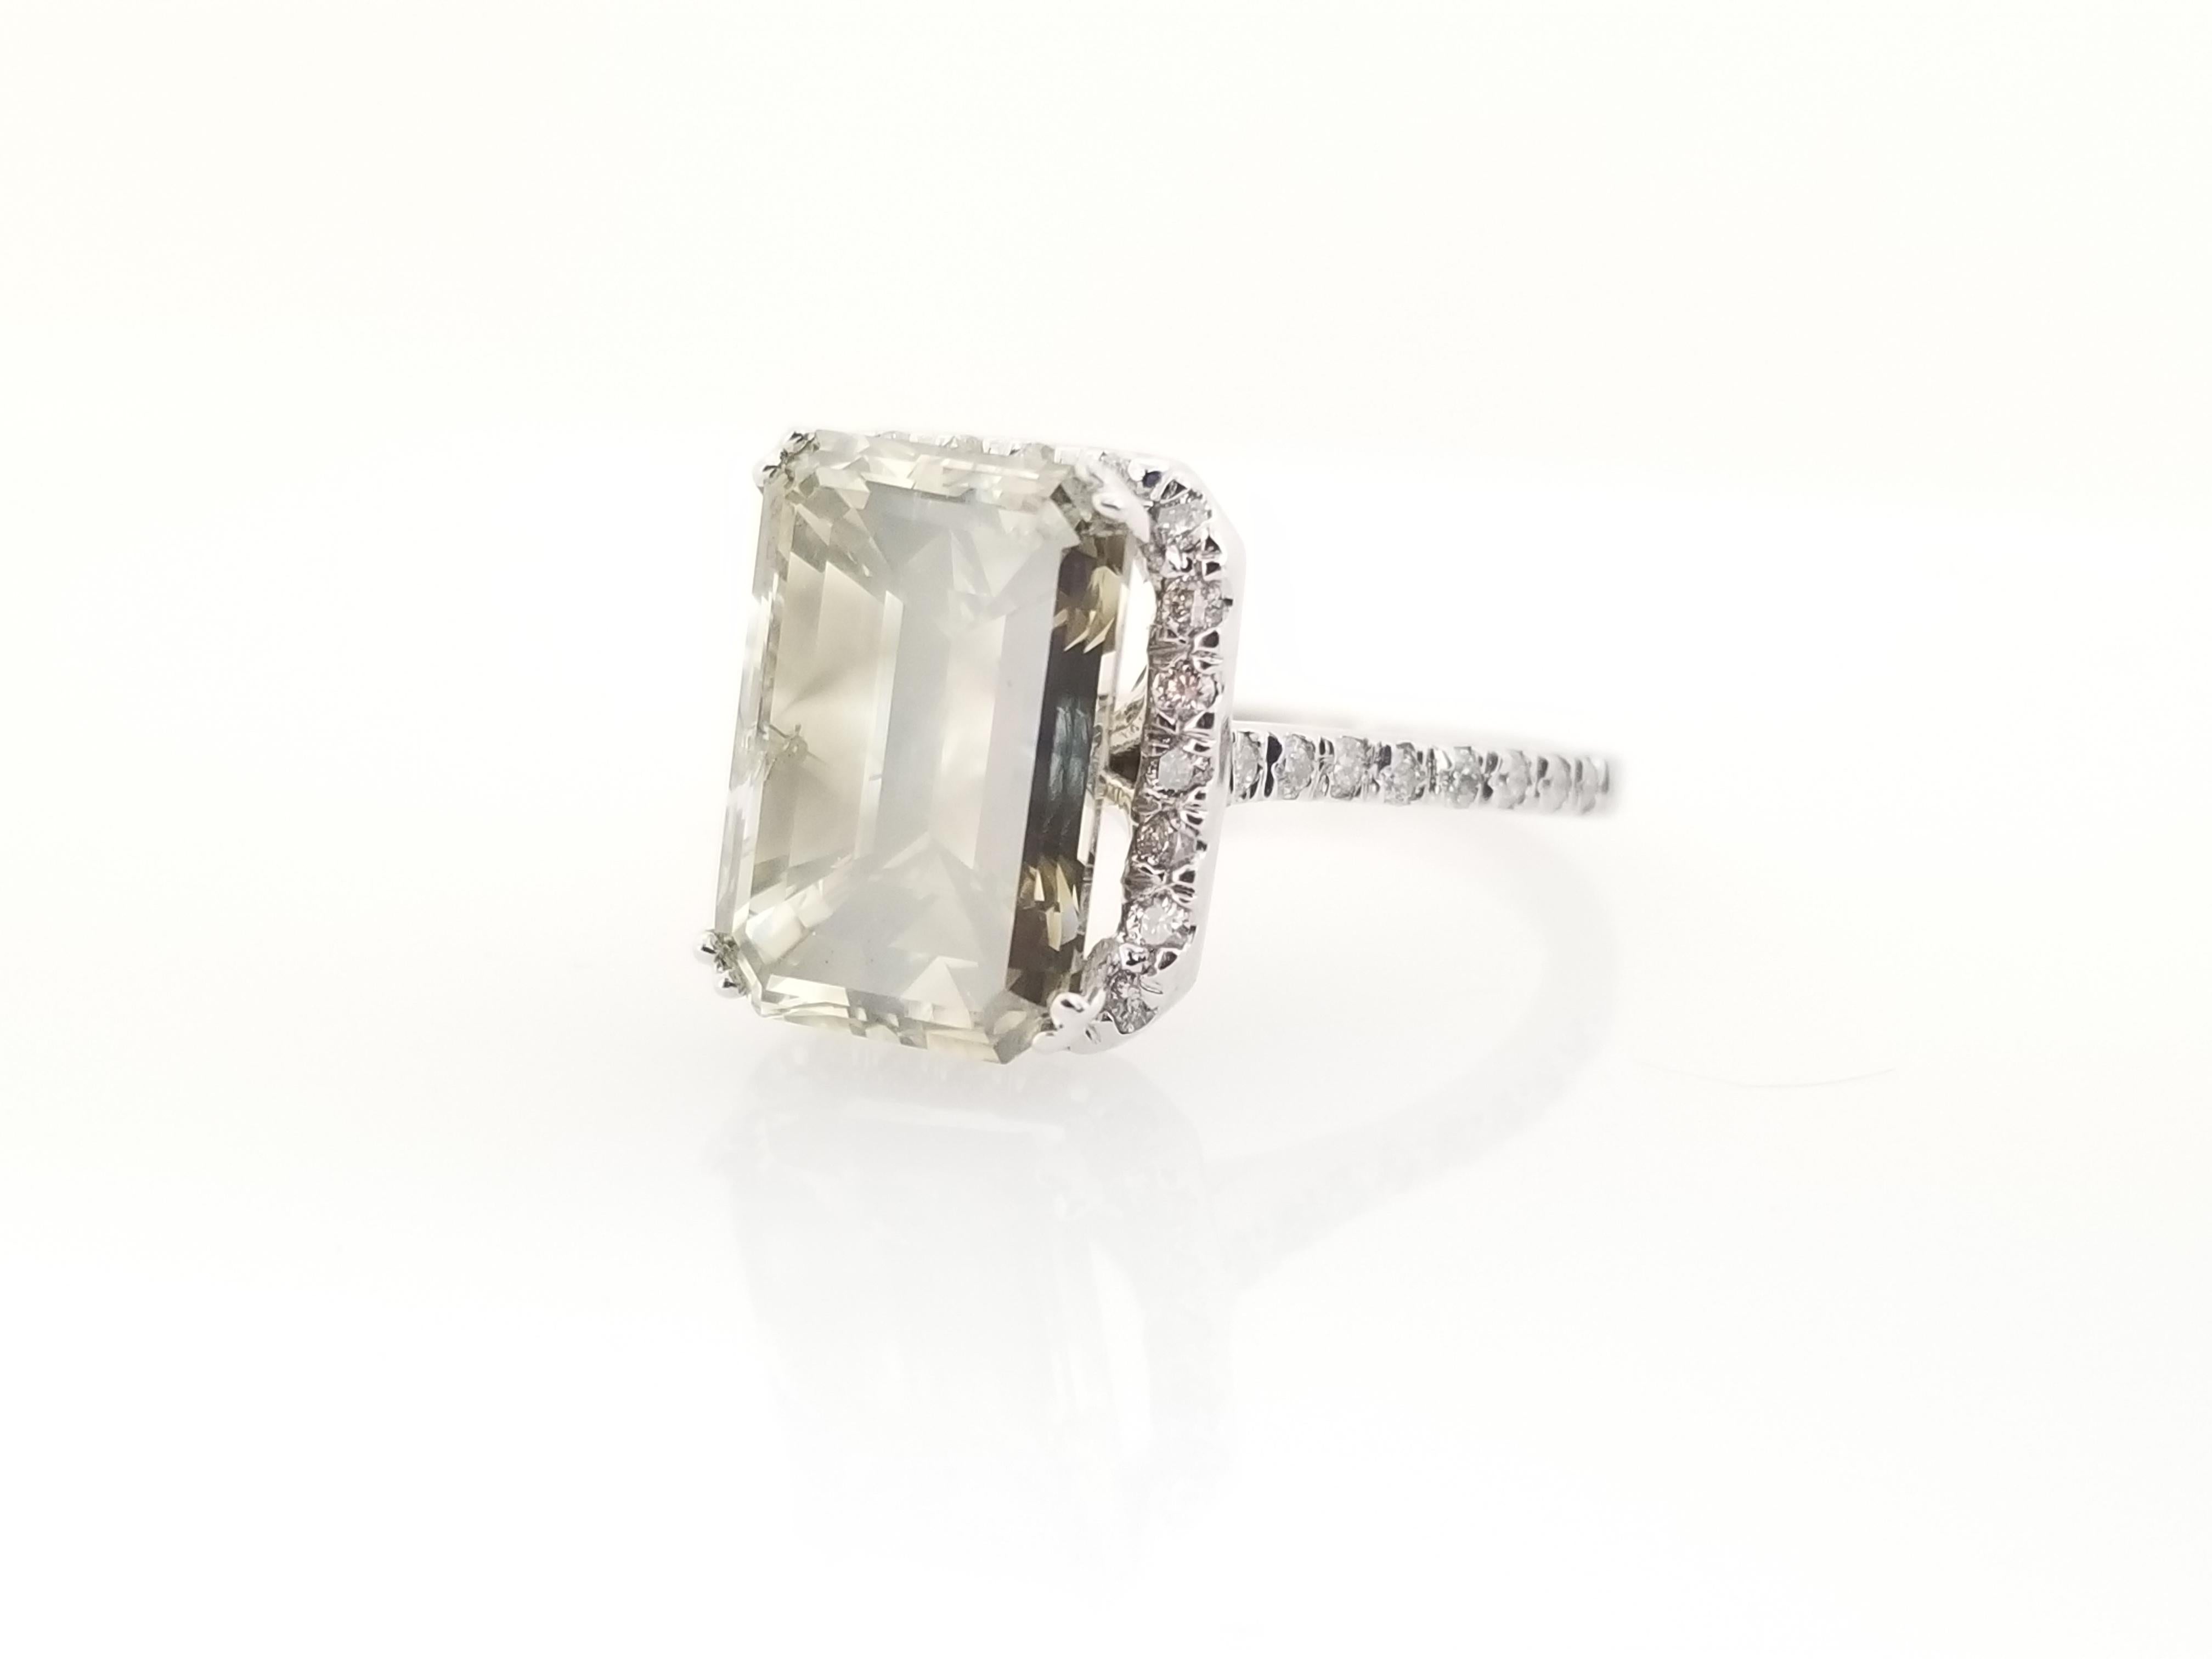 All Natural Fancy Color Gray Emerald Cut Diamond Ring Weighing 5.51 carats by IGI .Set on White Gold 14 Karat,  Elegance for every occasion.

IGI # GT12753503
Measurements: 12.12X8.23X6.29mm
Center Stone Weight: 5.51 cttw
Side Diamonds: 0.45